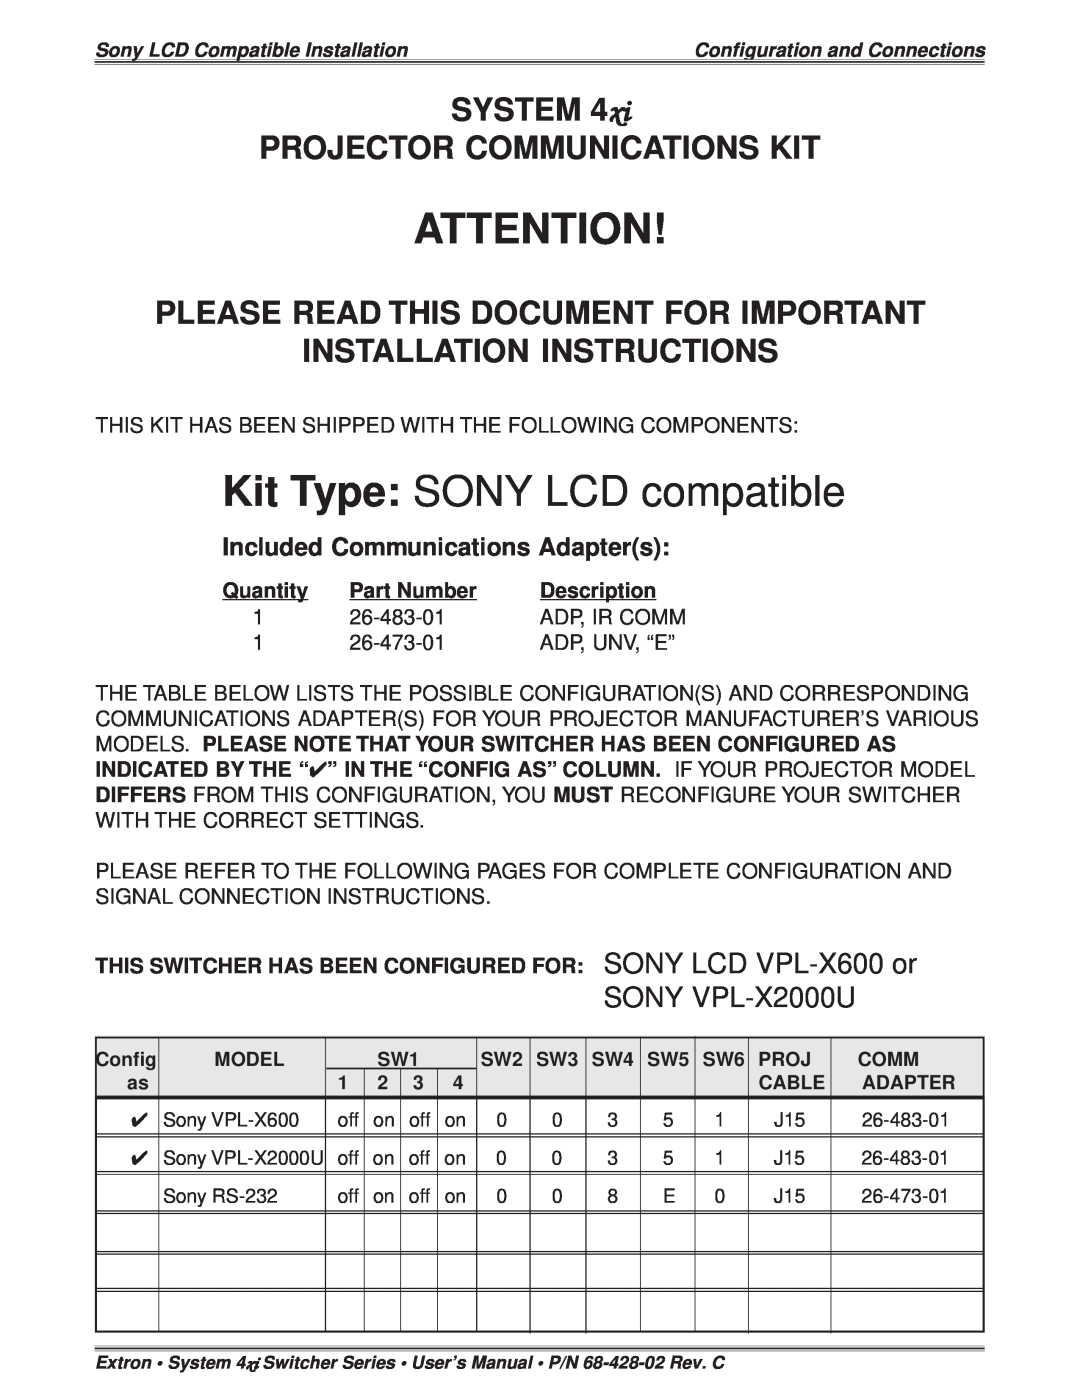 Sony 26-473-01 installation instructions Quantity, Part Number, Description, Kit Type SONY LCD compatible, SONY VPL-X2000U 